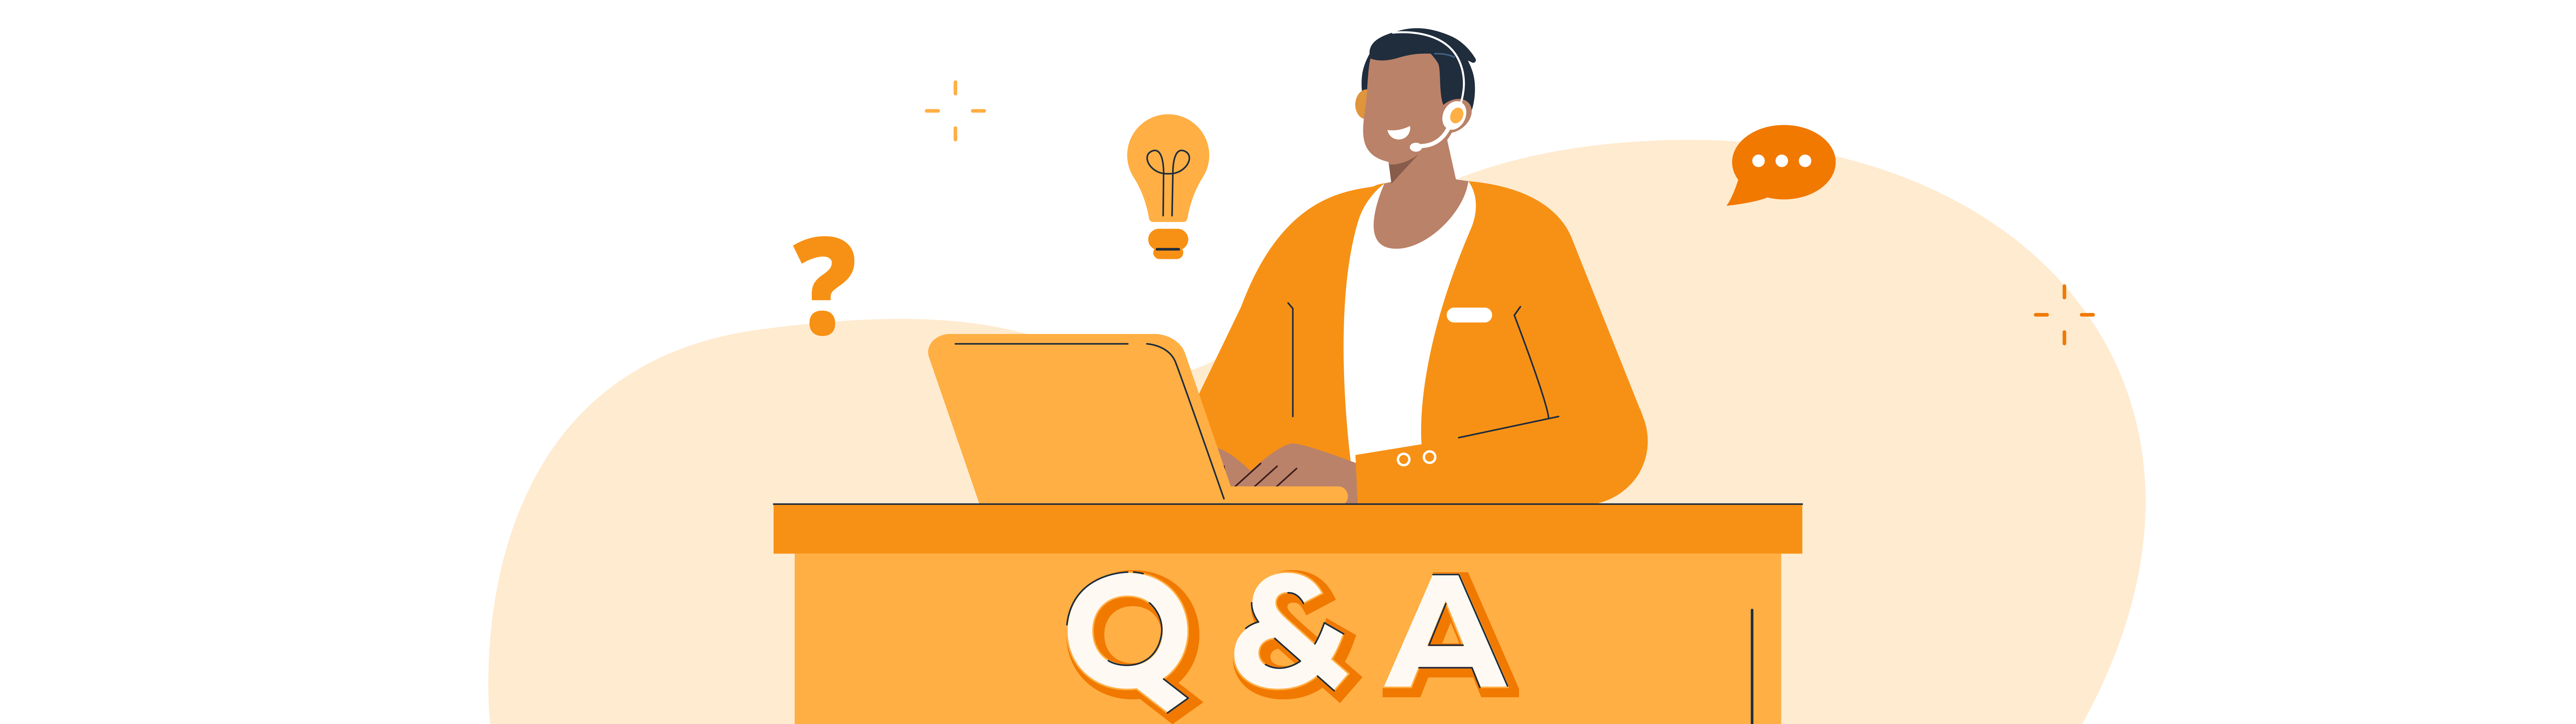 Cover Image for CoinFlip Preferred Q & A: Meet CoinFlip Preferred Client Relationship Manager Adam L. 